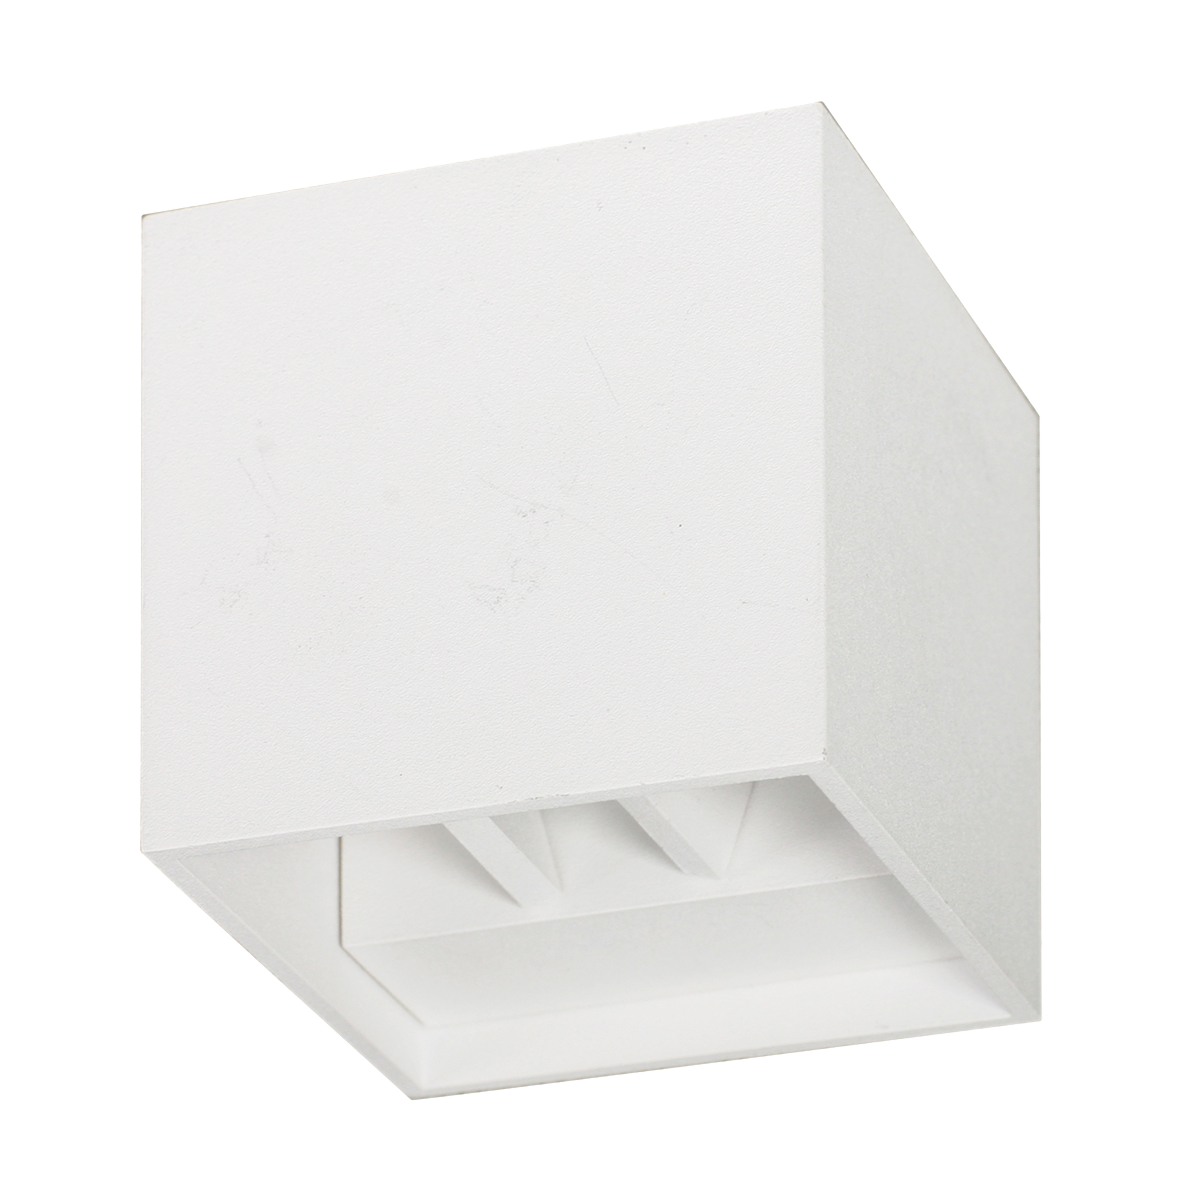 SAL CUBEII S9320 LED SURFACE MOUNTED WALL LIGHT AVAILABLE IN BLACK OR WHITE 